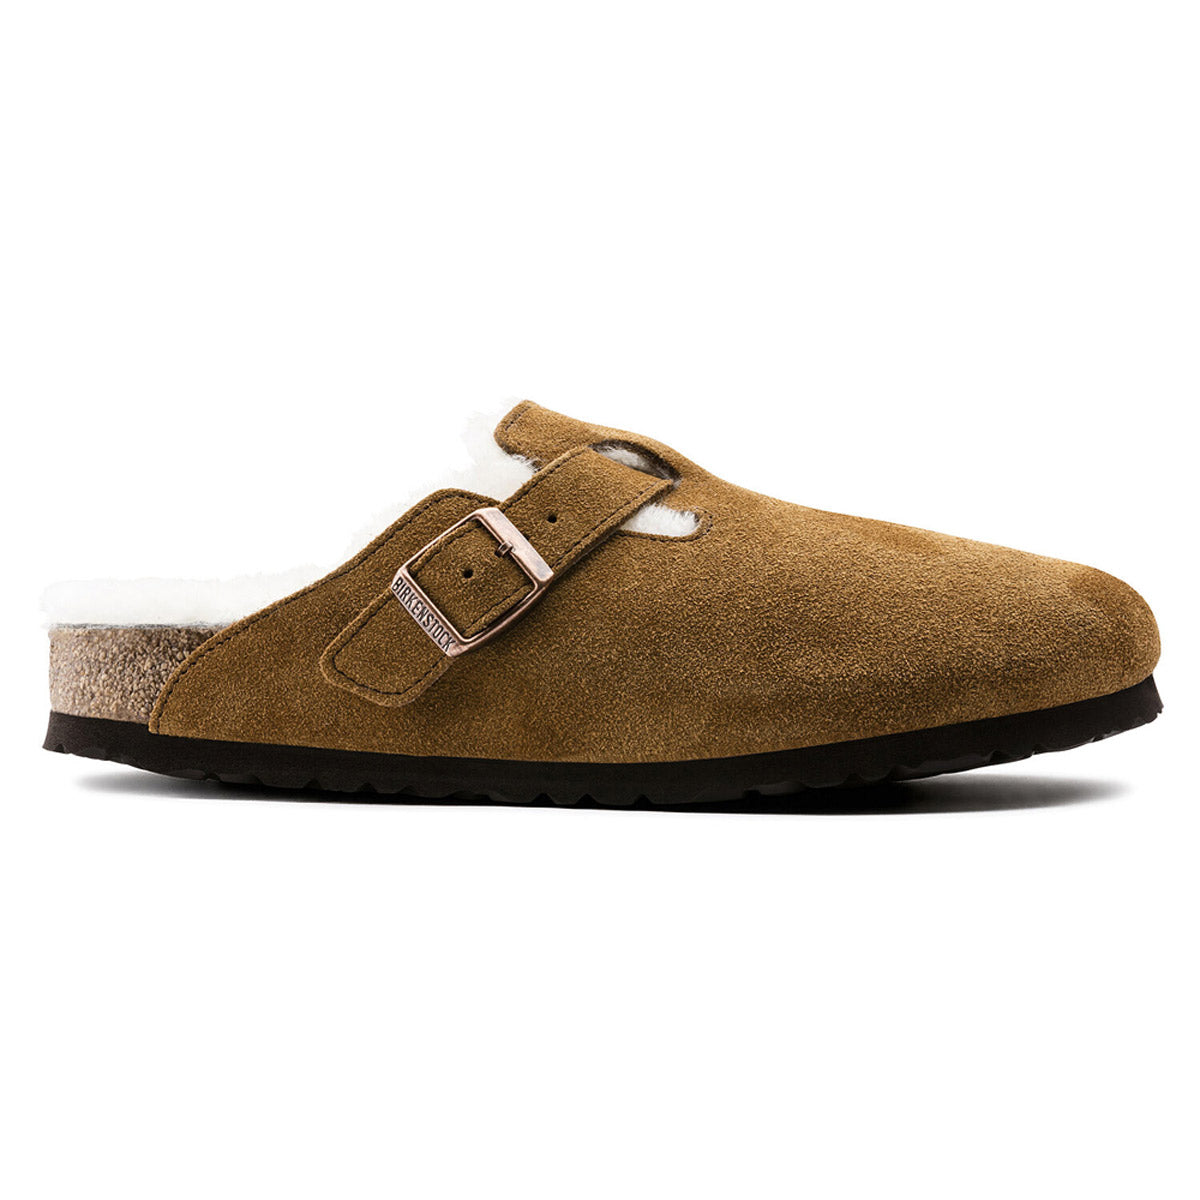 Side view of a single brown suede Birkenstock Boston Shearling Mink clog with a buckle and white wool lining on a white background.